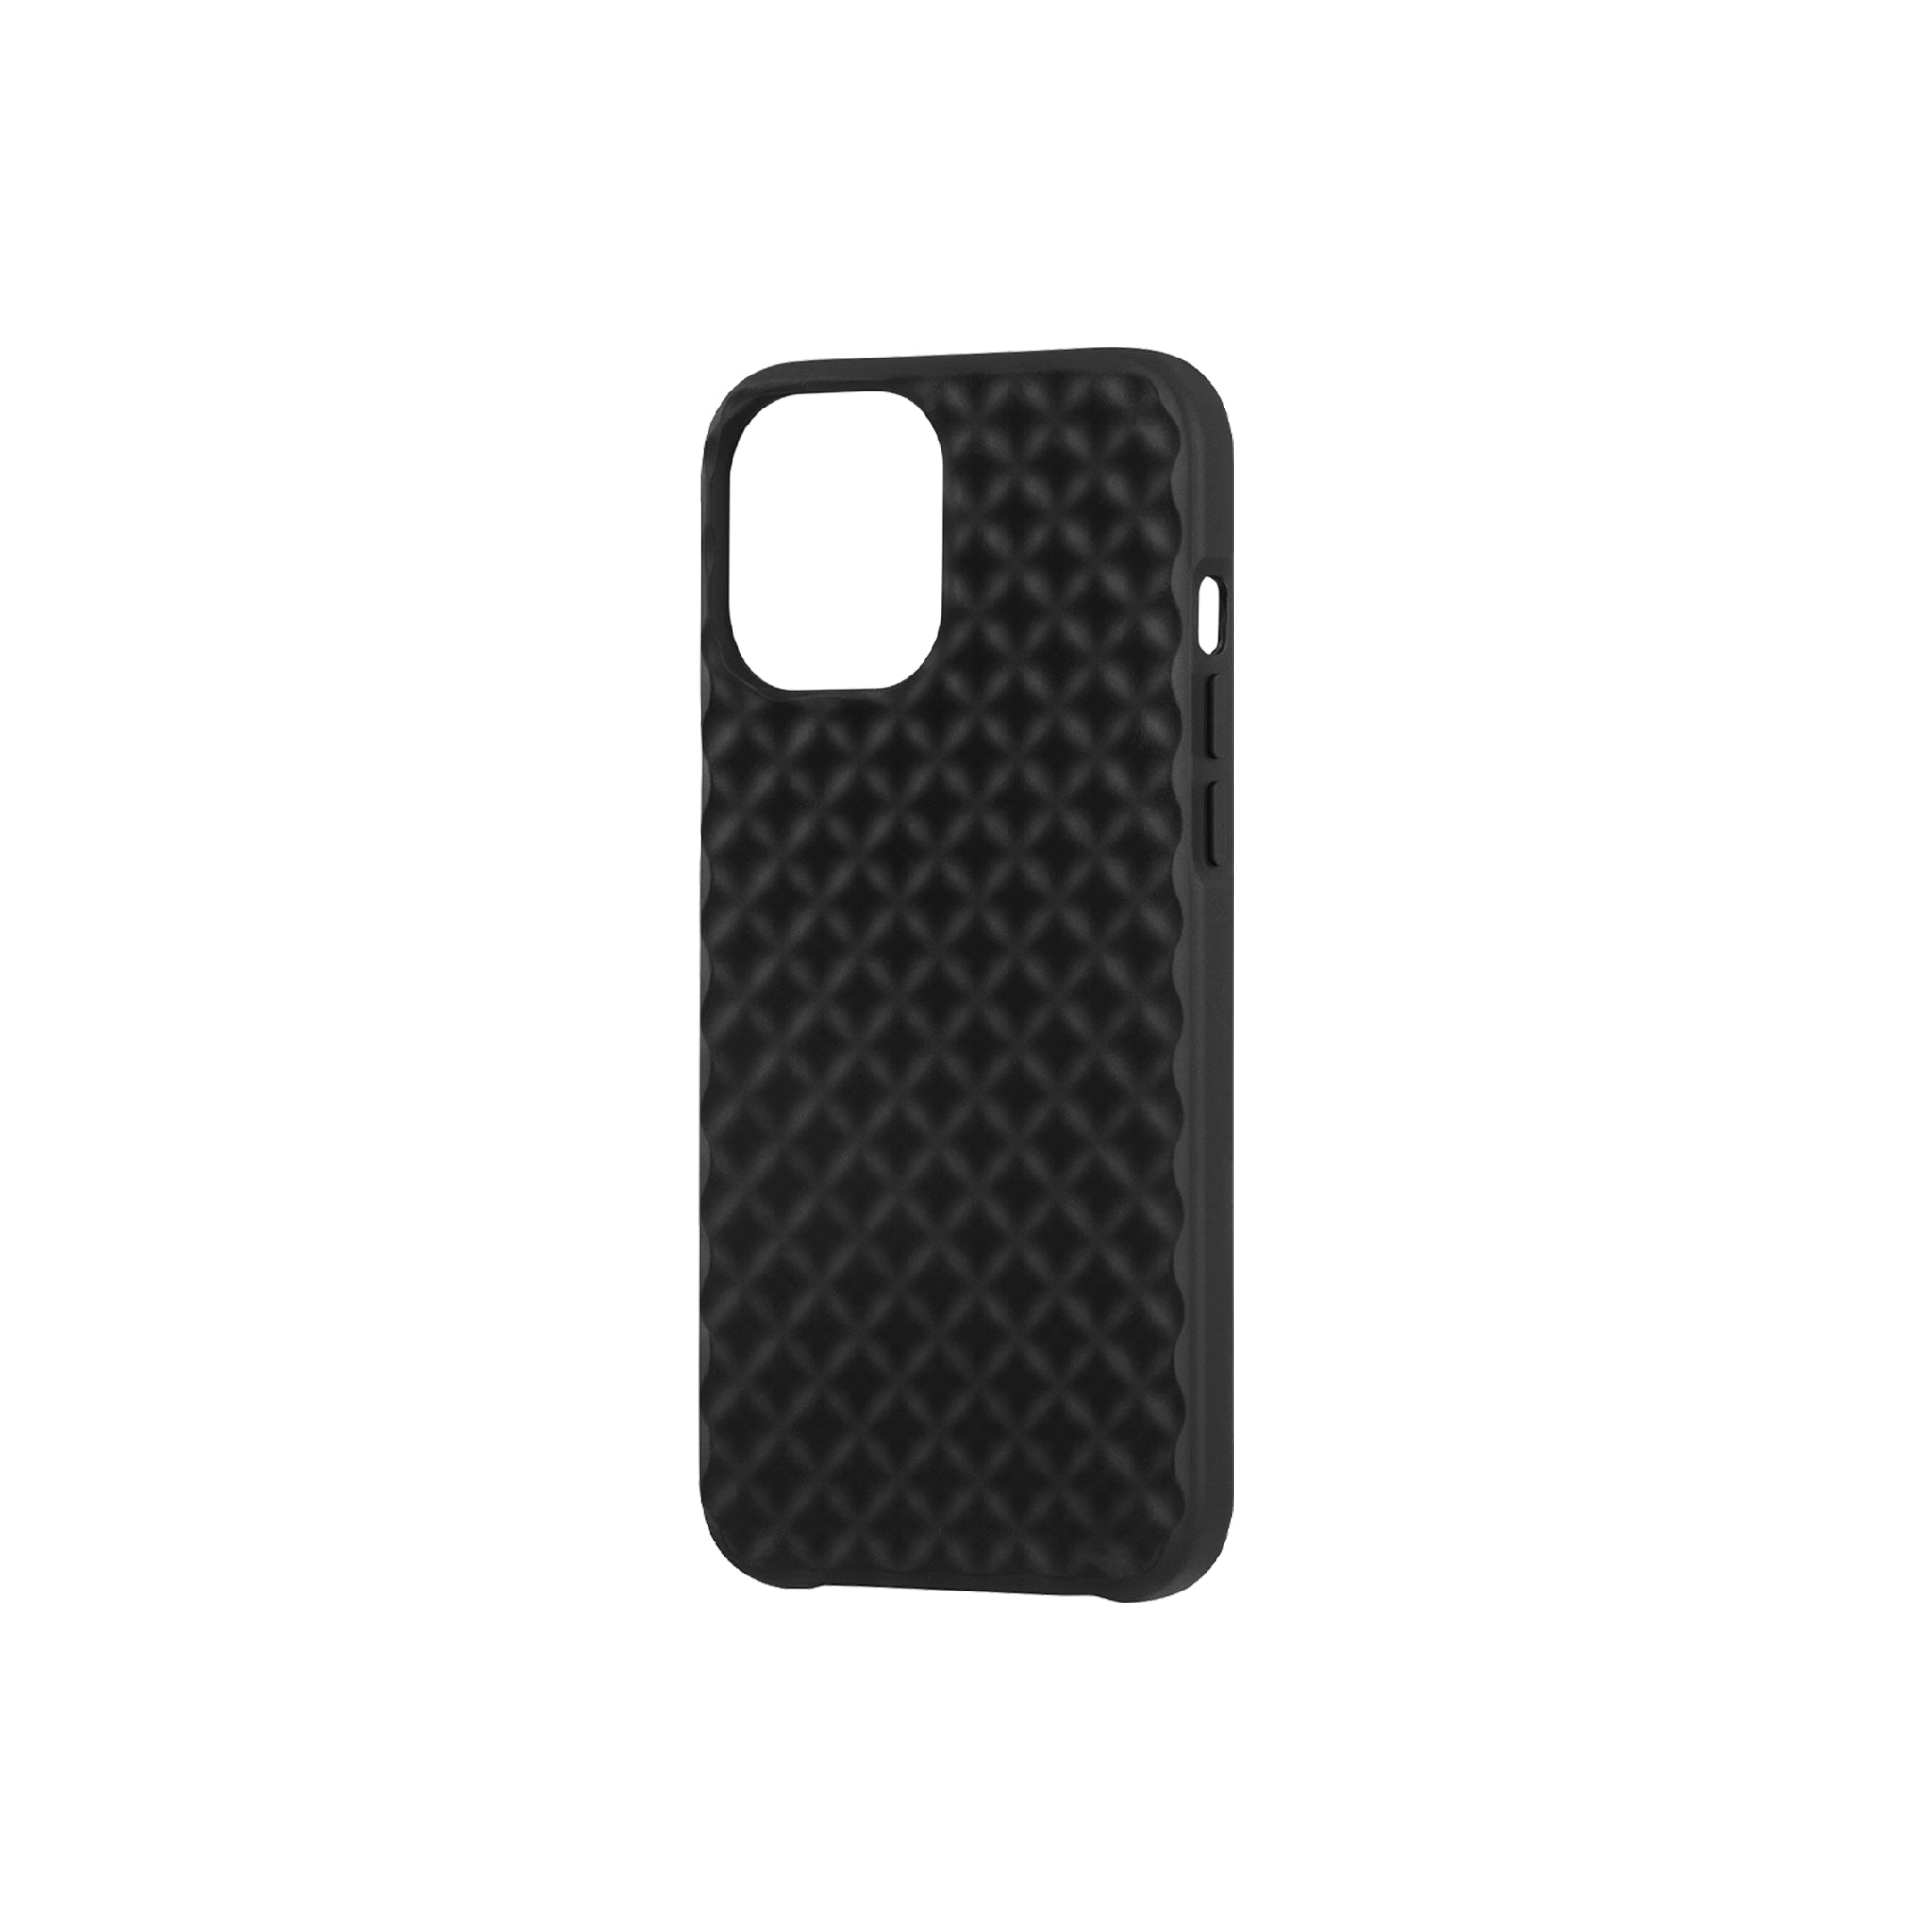 Pelican - Rogue Case For Apple Iphone 12 Pro Max - Black